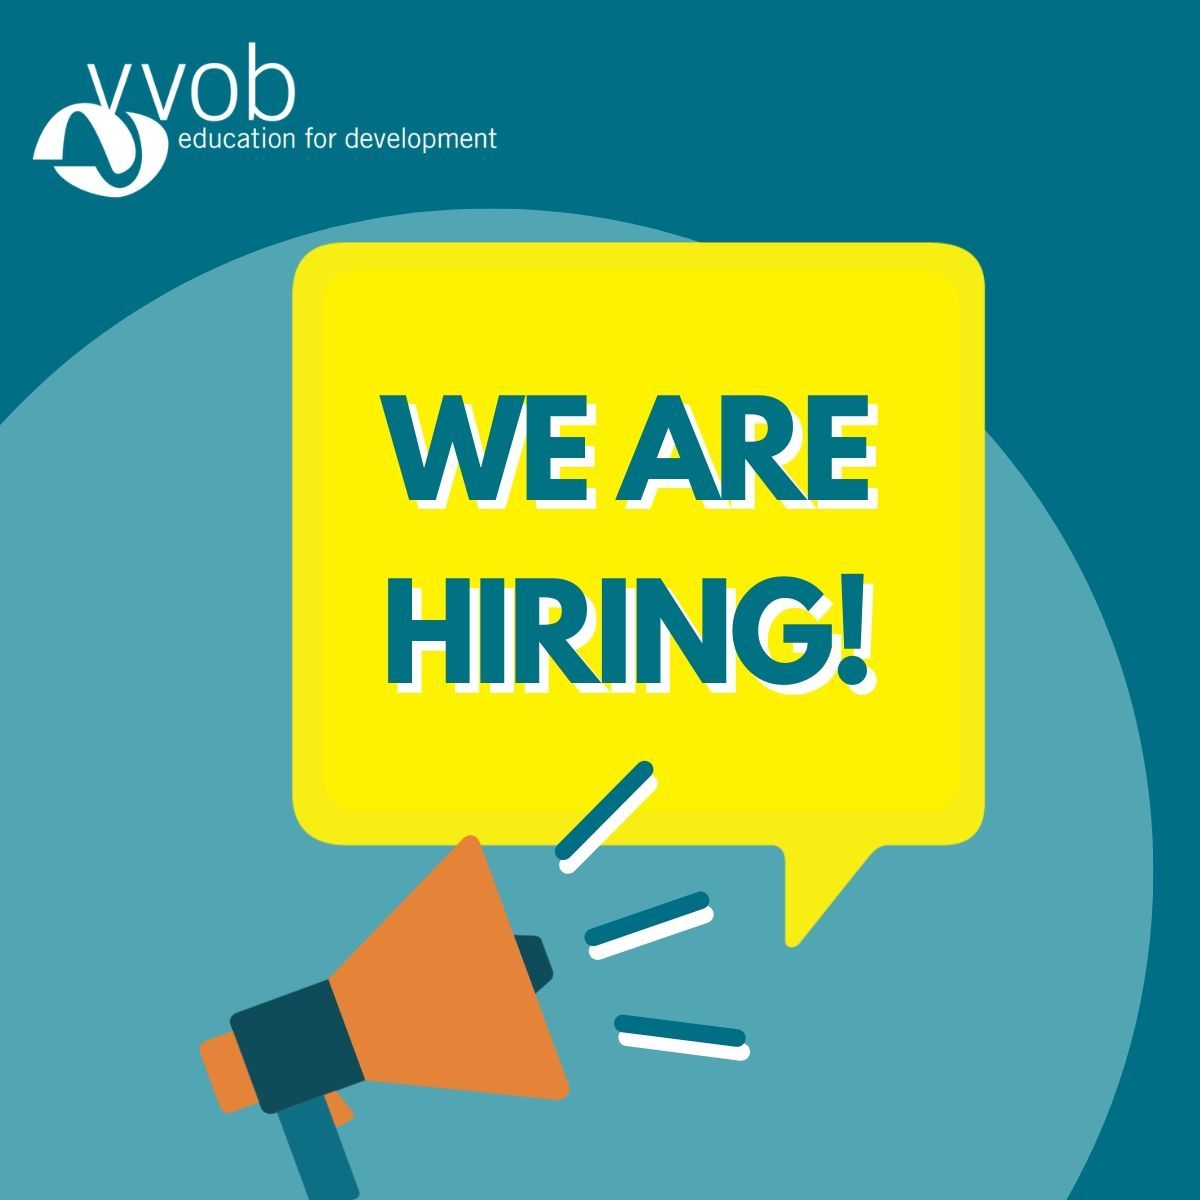 Exciting Opportunity! Join VVOB in South Africa as our MEAL Officer. Start date: 1 June 2024 Location: Durban Salary: Determined based on VVOB global salary scales and work experience. Deadline for applications: 6 May 2024 Find more information here: buff.ly/4aShMh1